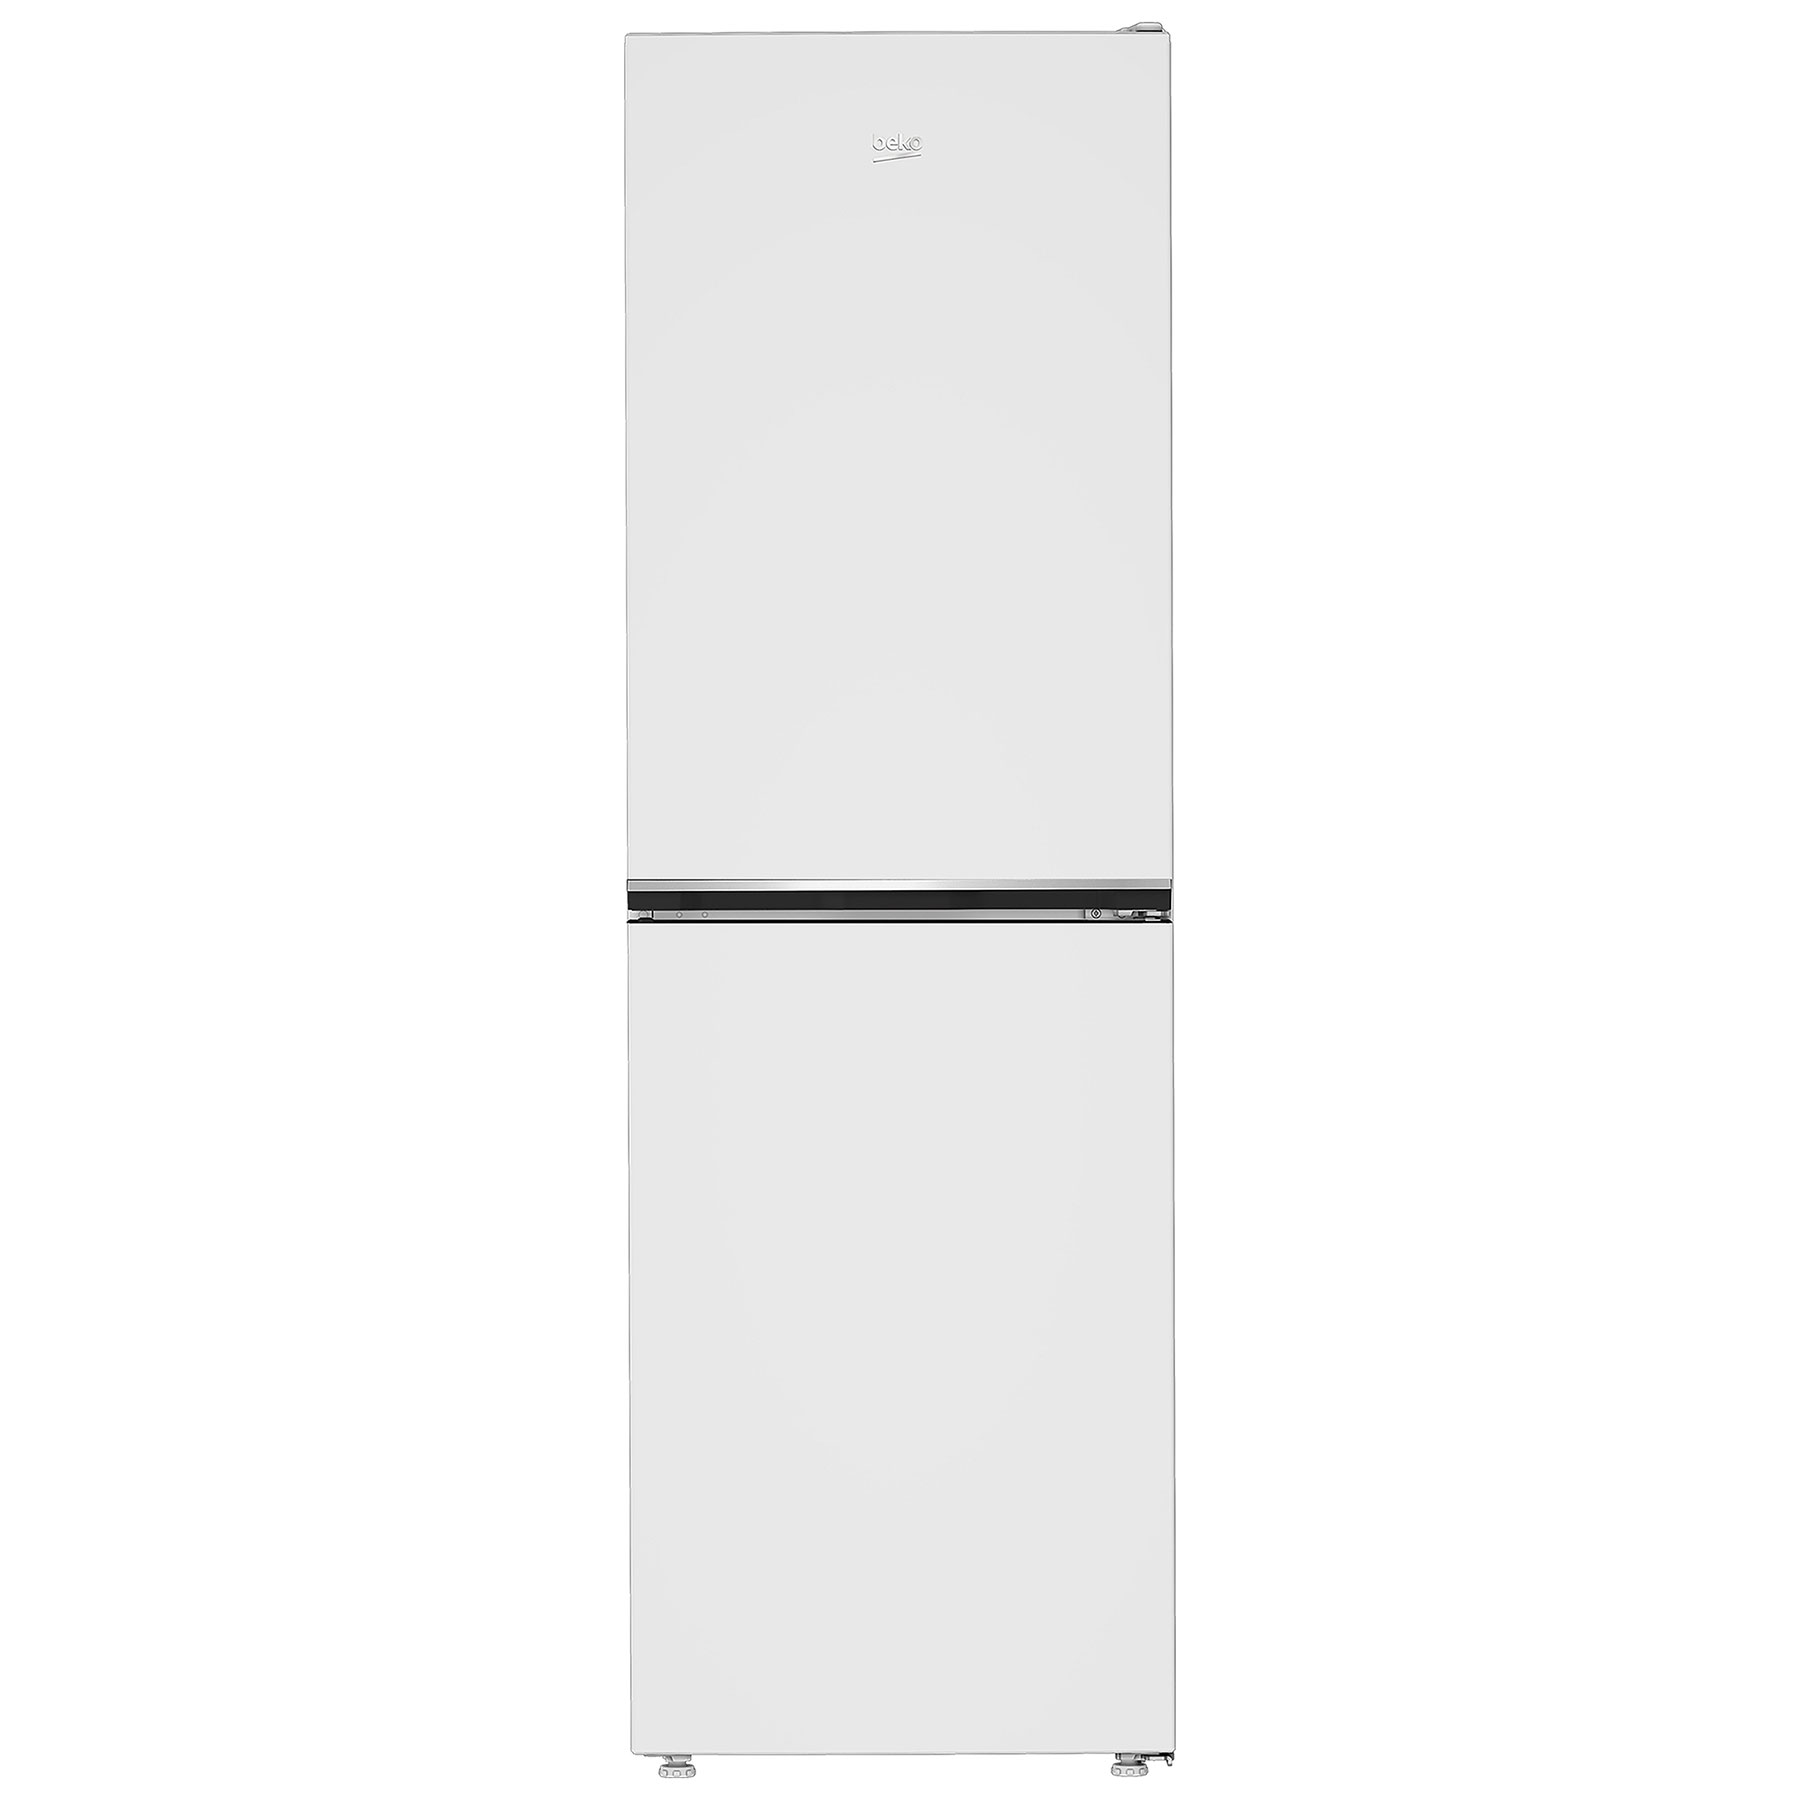 Beko CNG4692VW 60cm Frost Free Fridge Freezer in White 1 82m E Rated